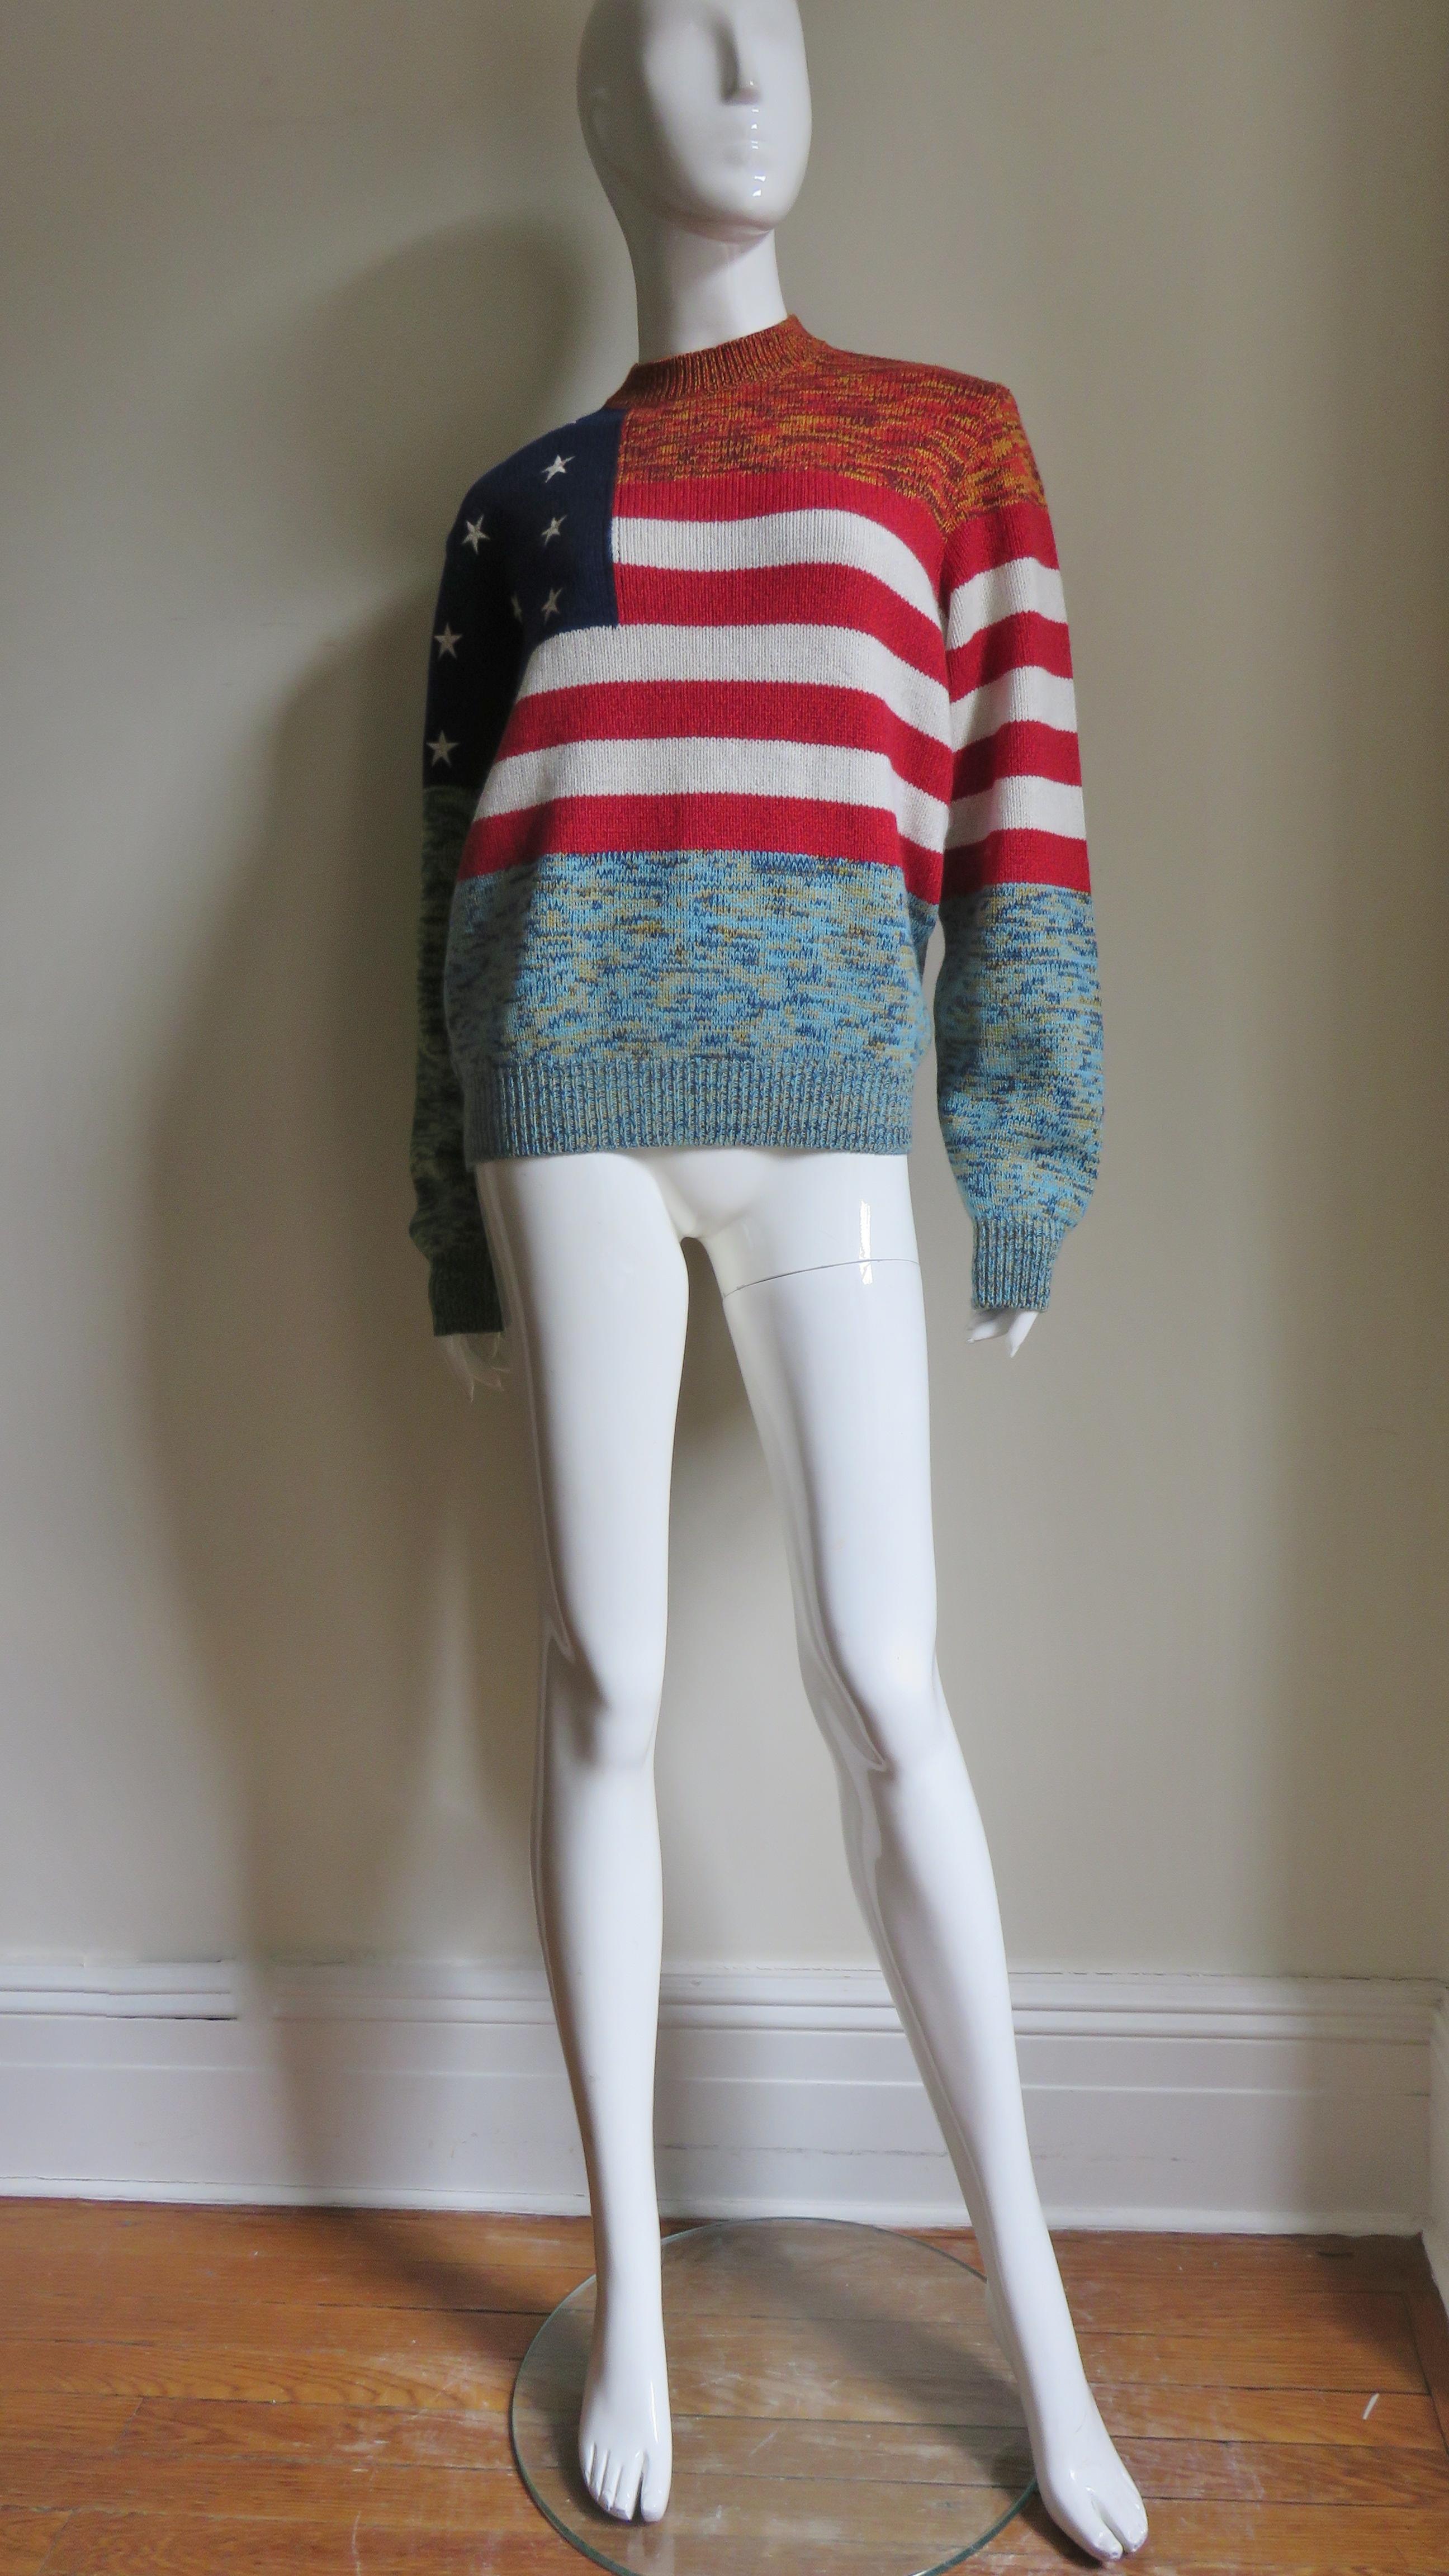 Gianni Versace New Vintage Cashmere Colorblock American Flag Sweater For Sale 1